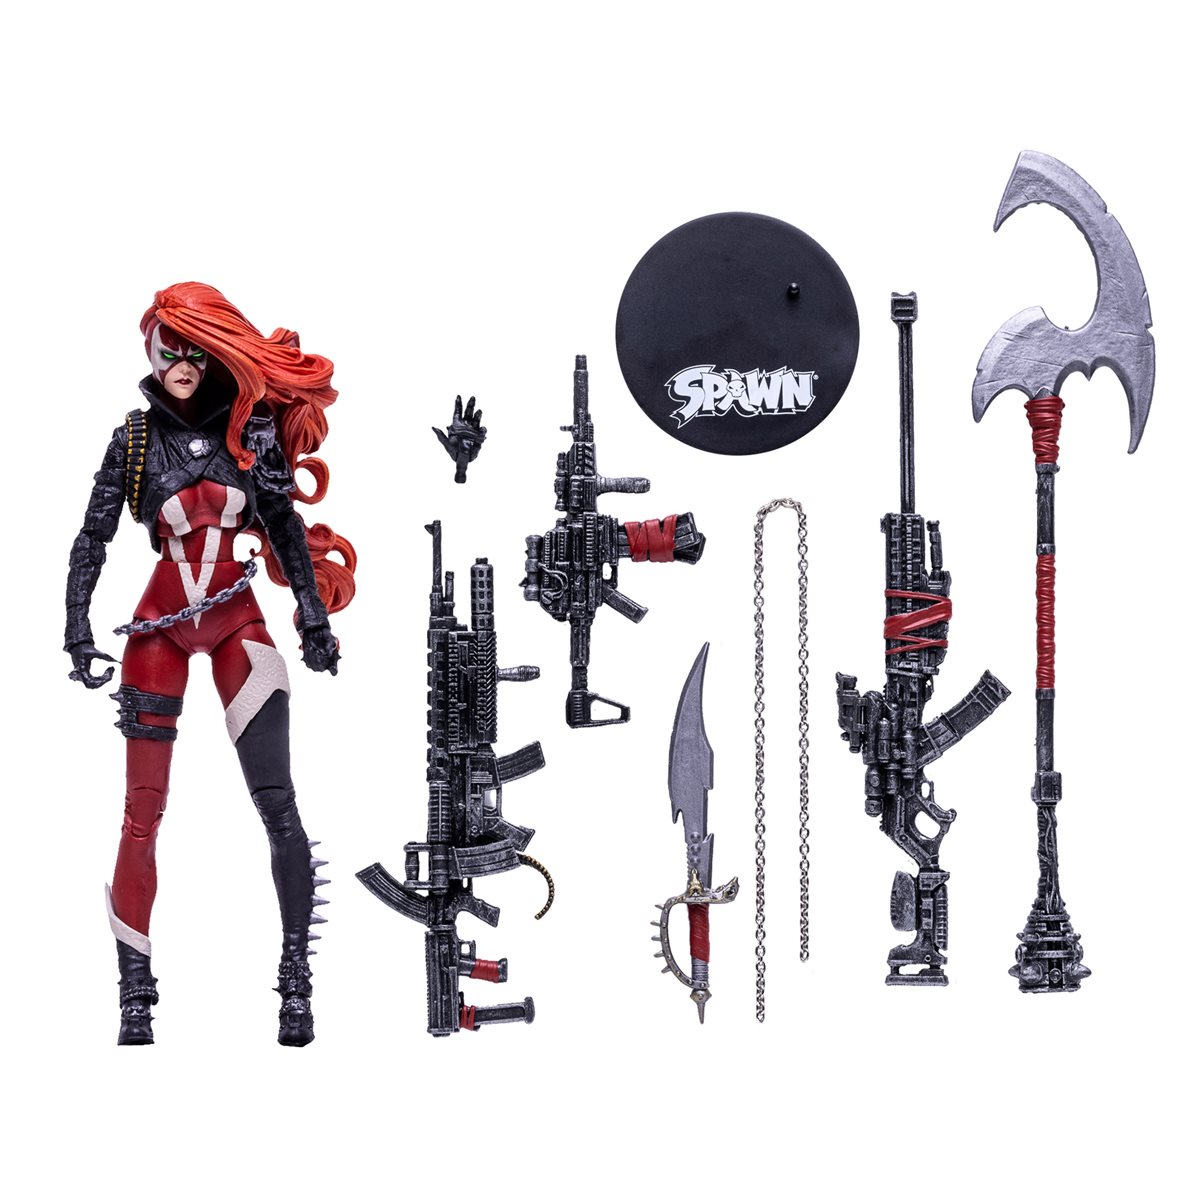 Spawn 7 Inch Scale She Spawn Deluxe Action Figure